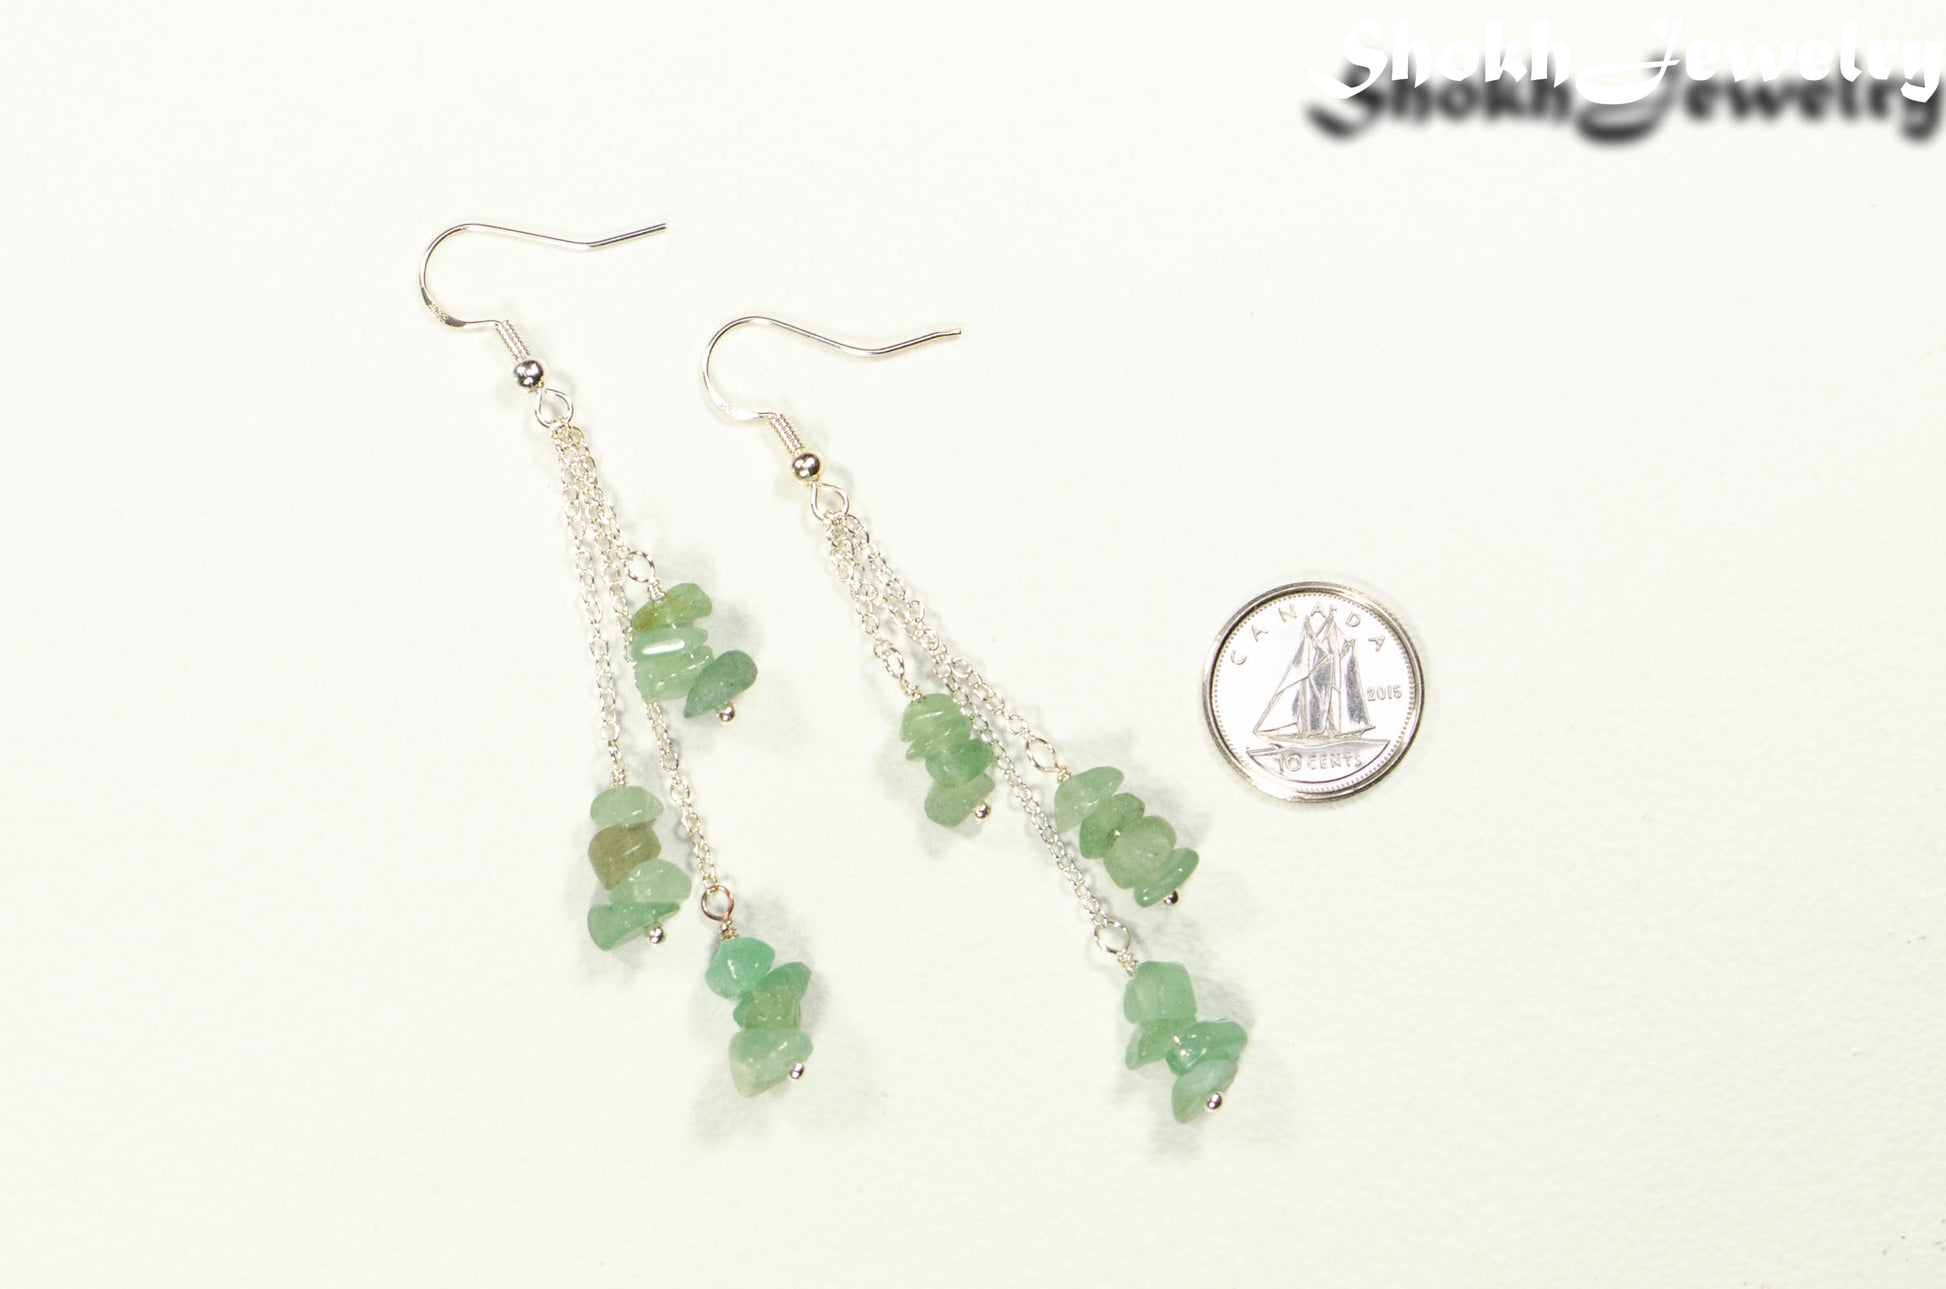 Long Silver Plated Chain and Green Aventurine Crystal Chip Earrings beside a dime